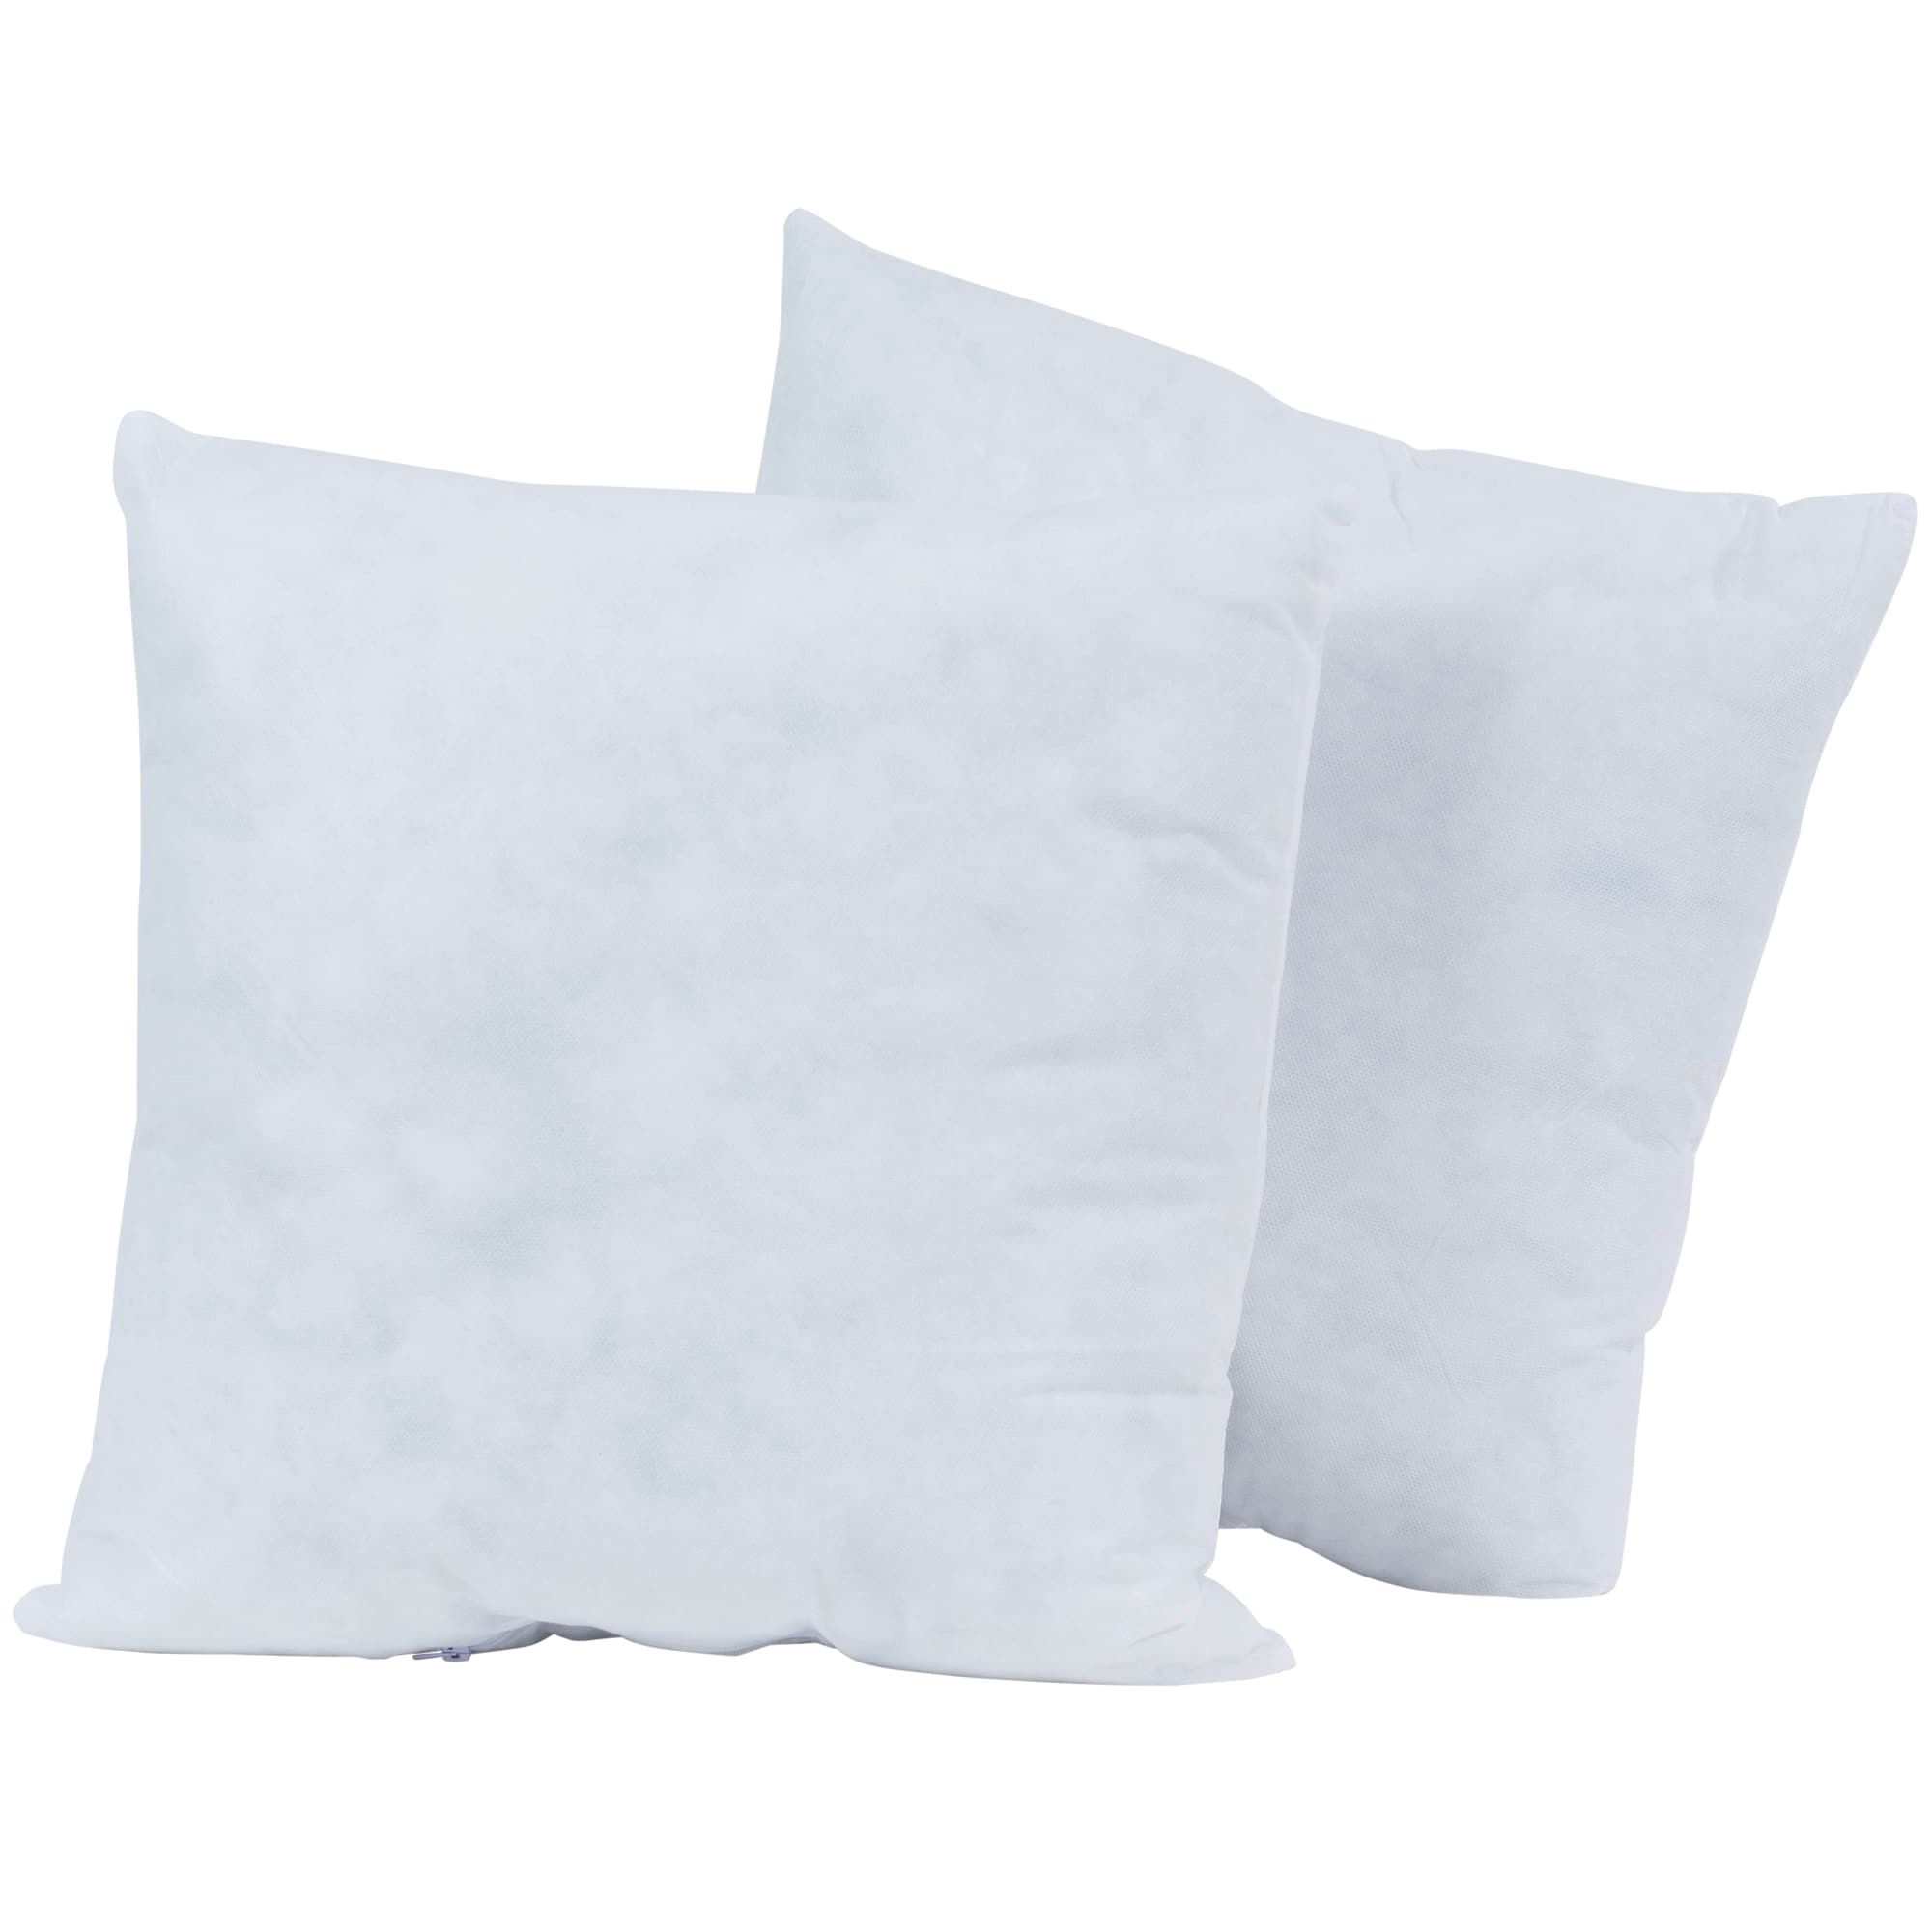 Poly-Fil Basic Pillow Insert 24in x 24in 2 Pack